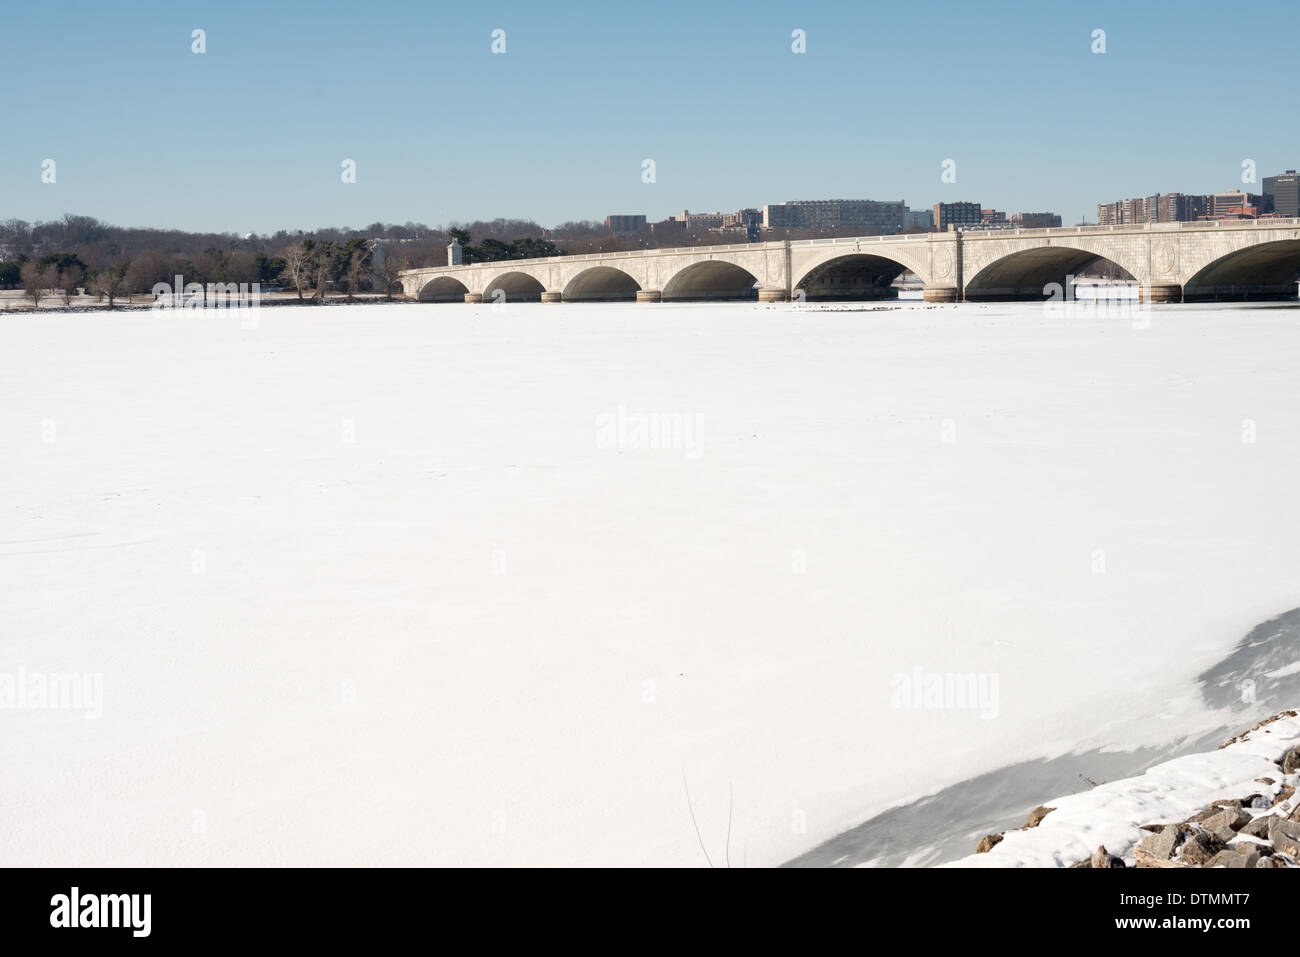 WASHINGTON DC, USA - Arlington Memorial Bridge spans an expanse of ice and snow-covered Potomac from Washington DC across to Arlington Virginia. The Potomac running through Washington DC is frozen and covered with a layer of snow. The region has experienced an unusually cold winter, with sustained low temperatures. Stock Photo